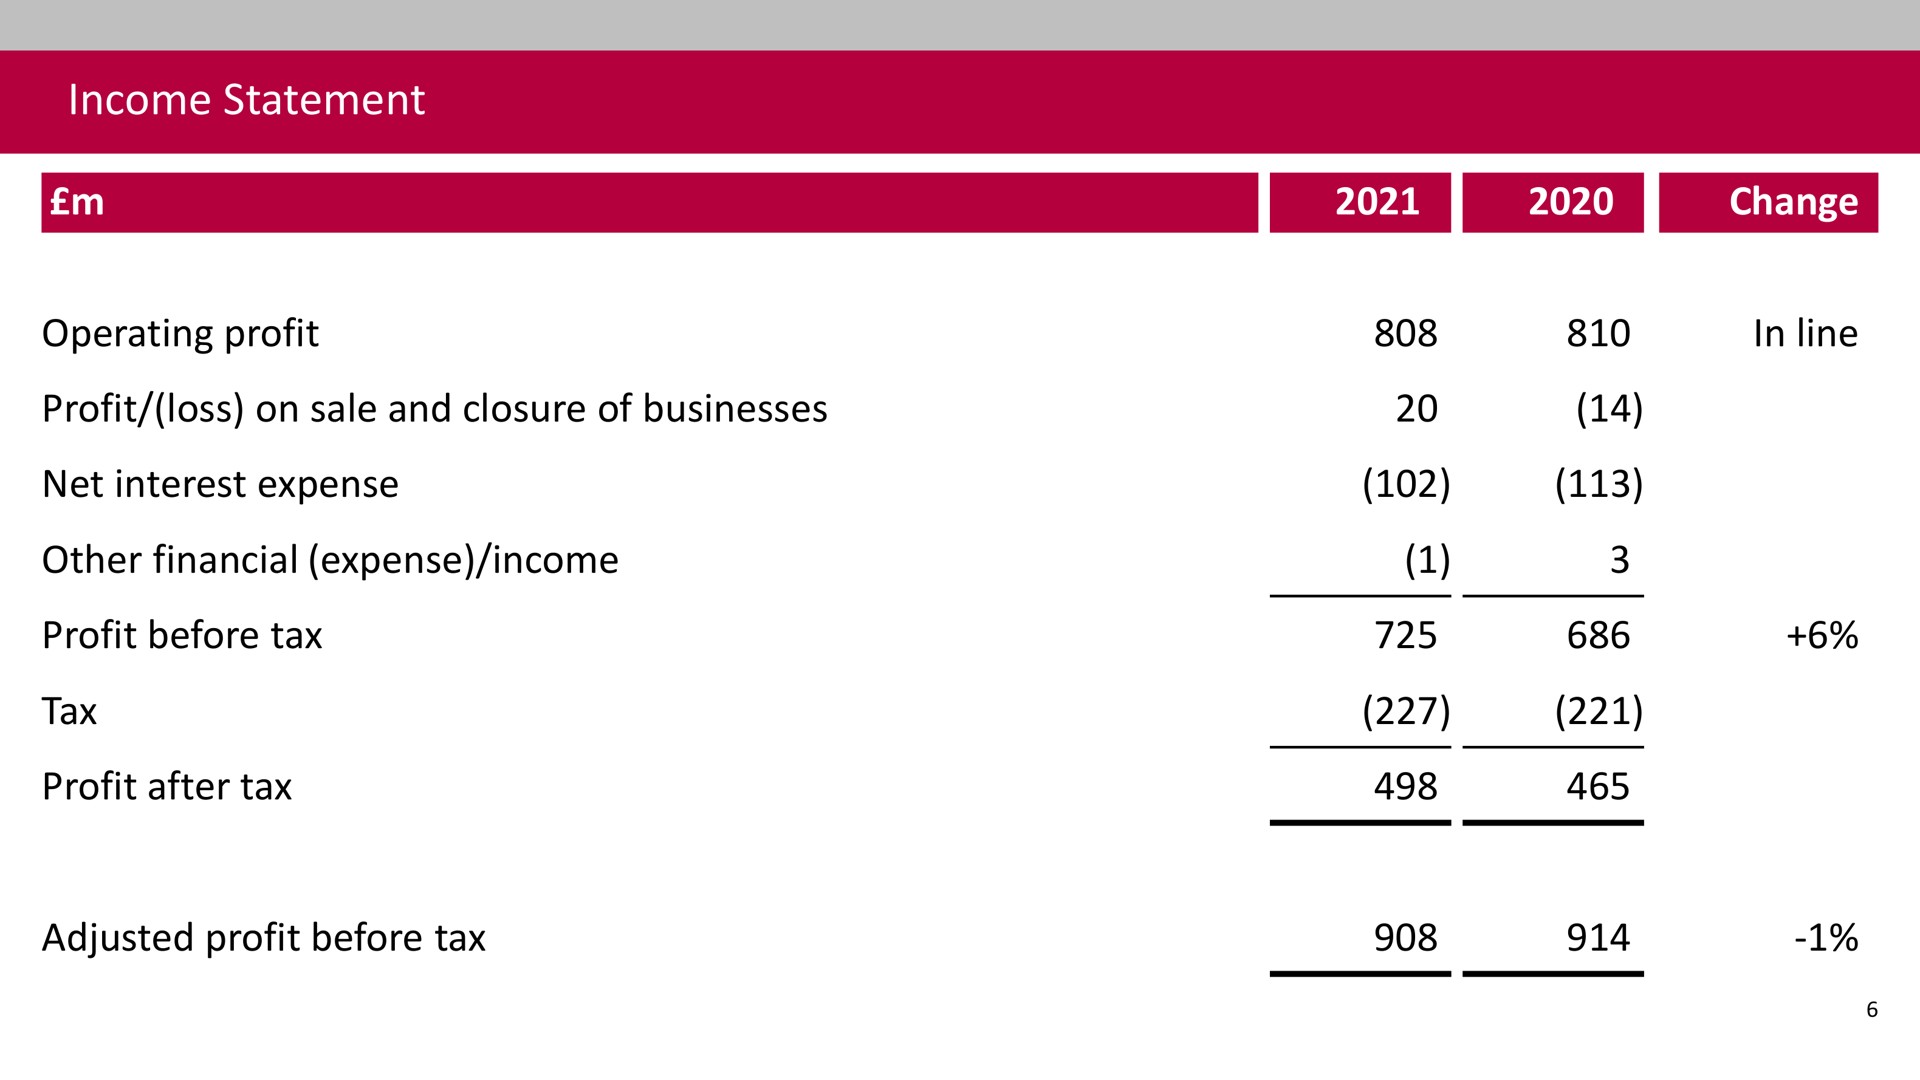 income statement | Associated British Foods